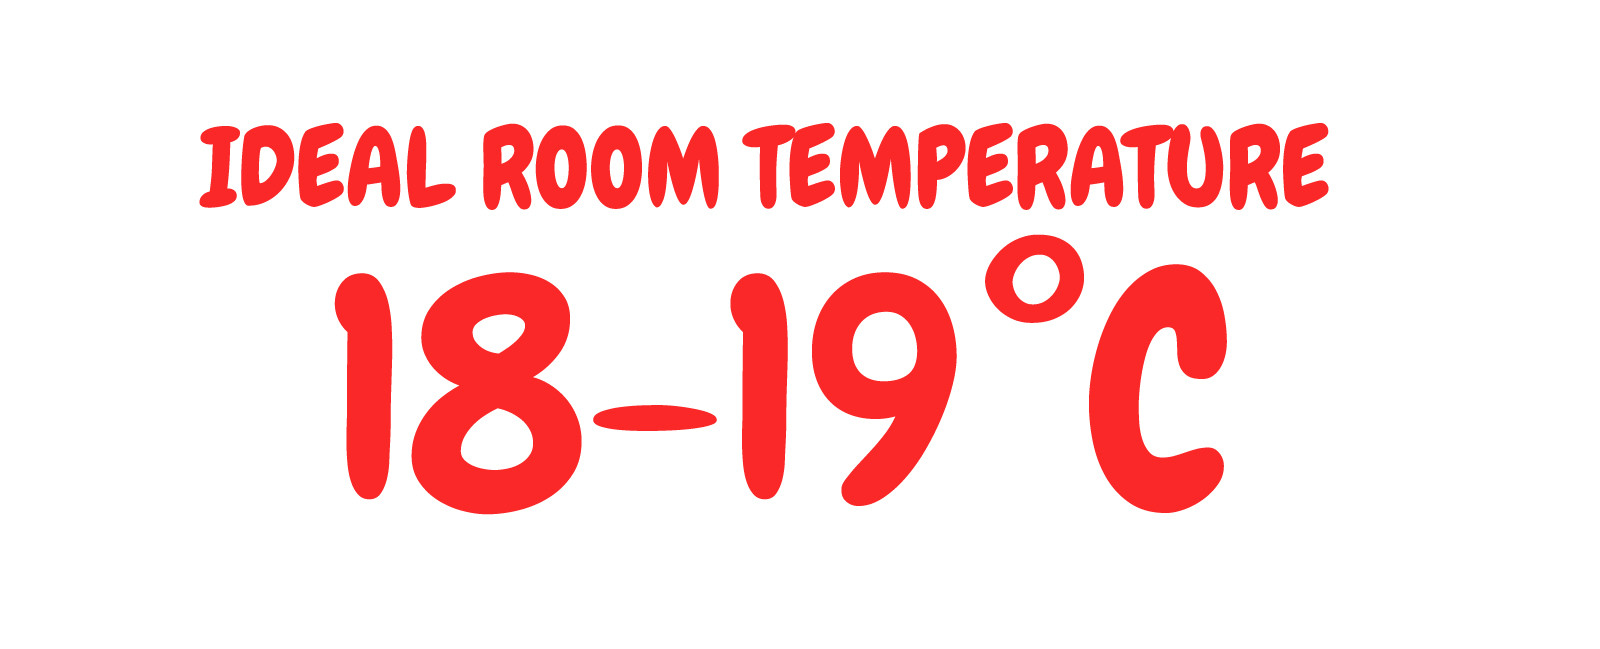 What is the Average Room Temperature?